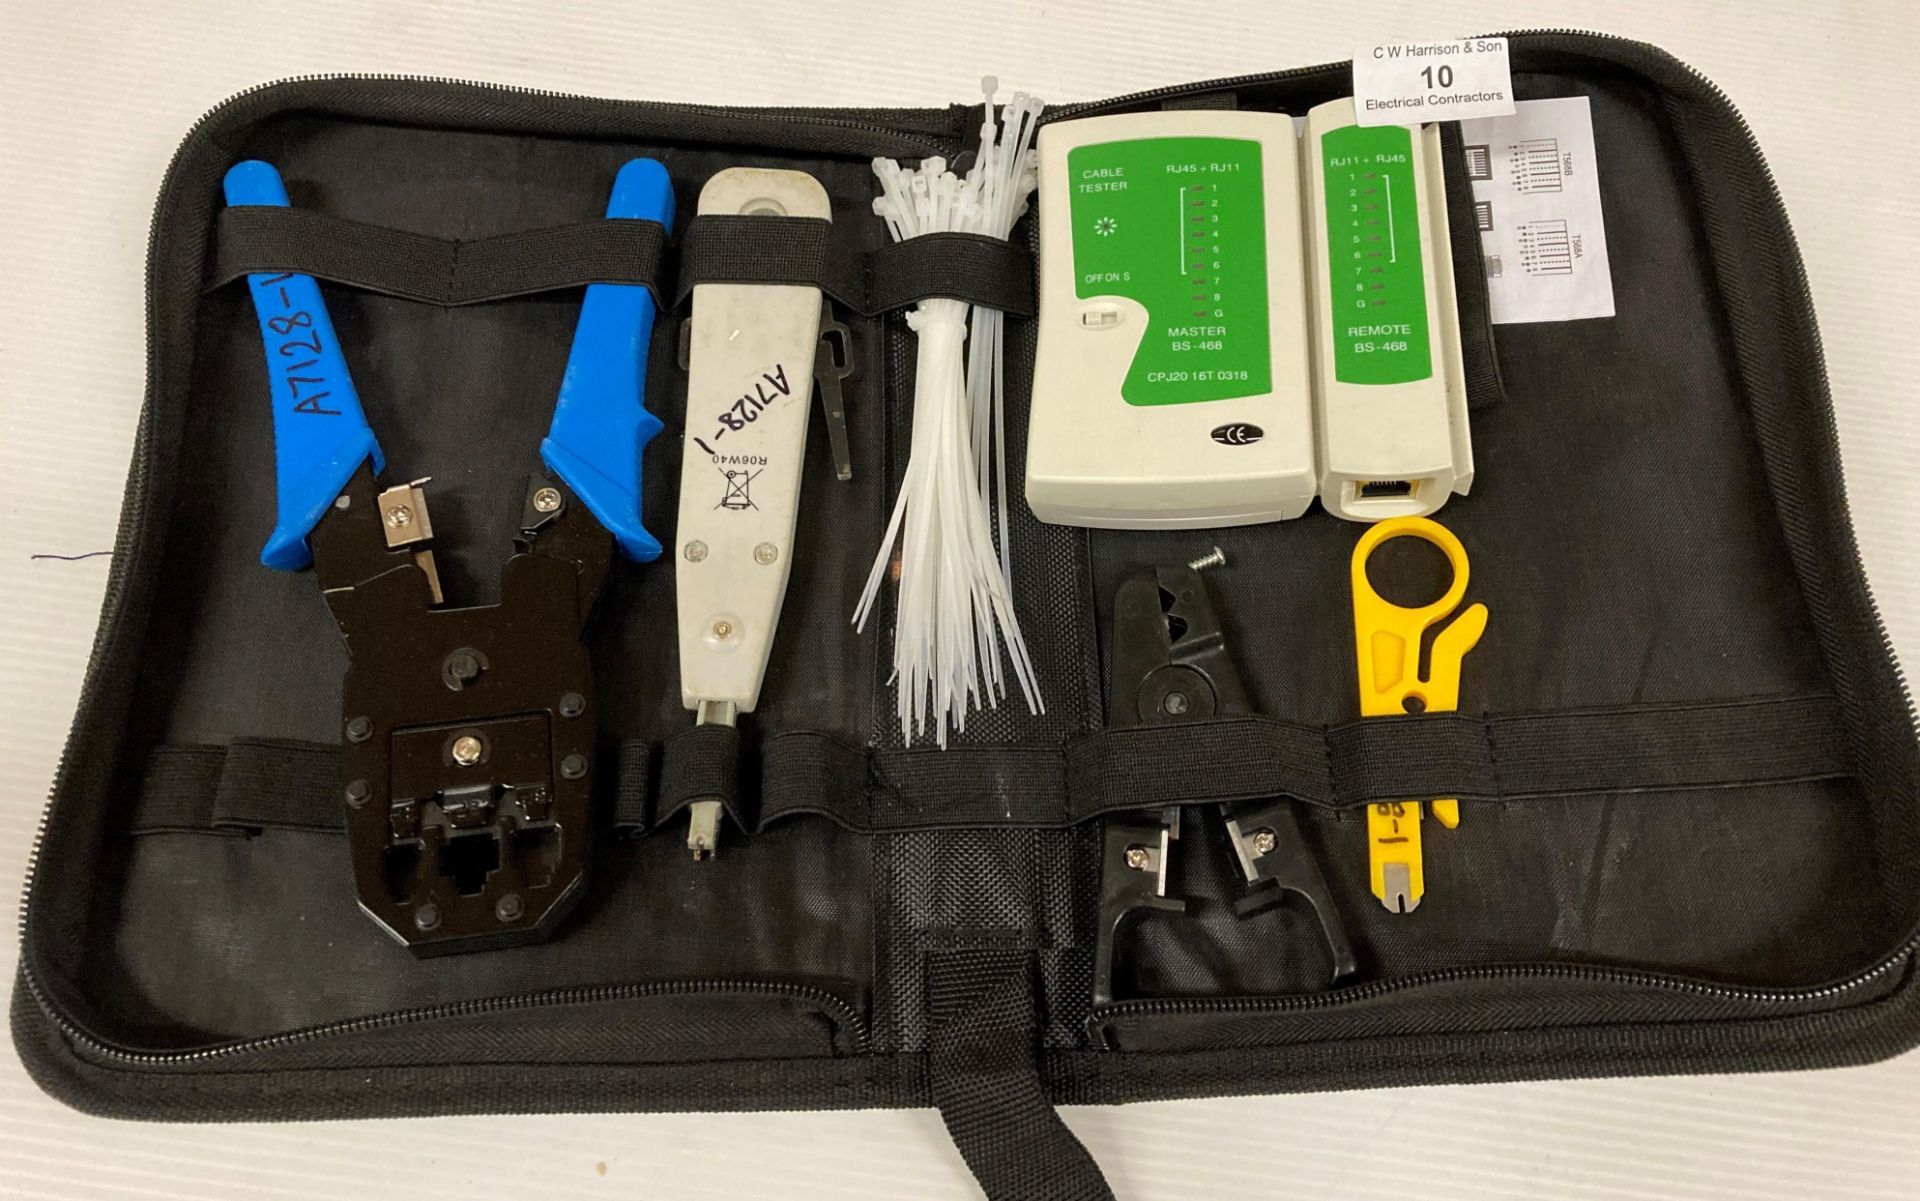 Cable tester CPJ20 complete with remote and cable accessories (Saleroom location: F07)